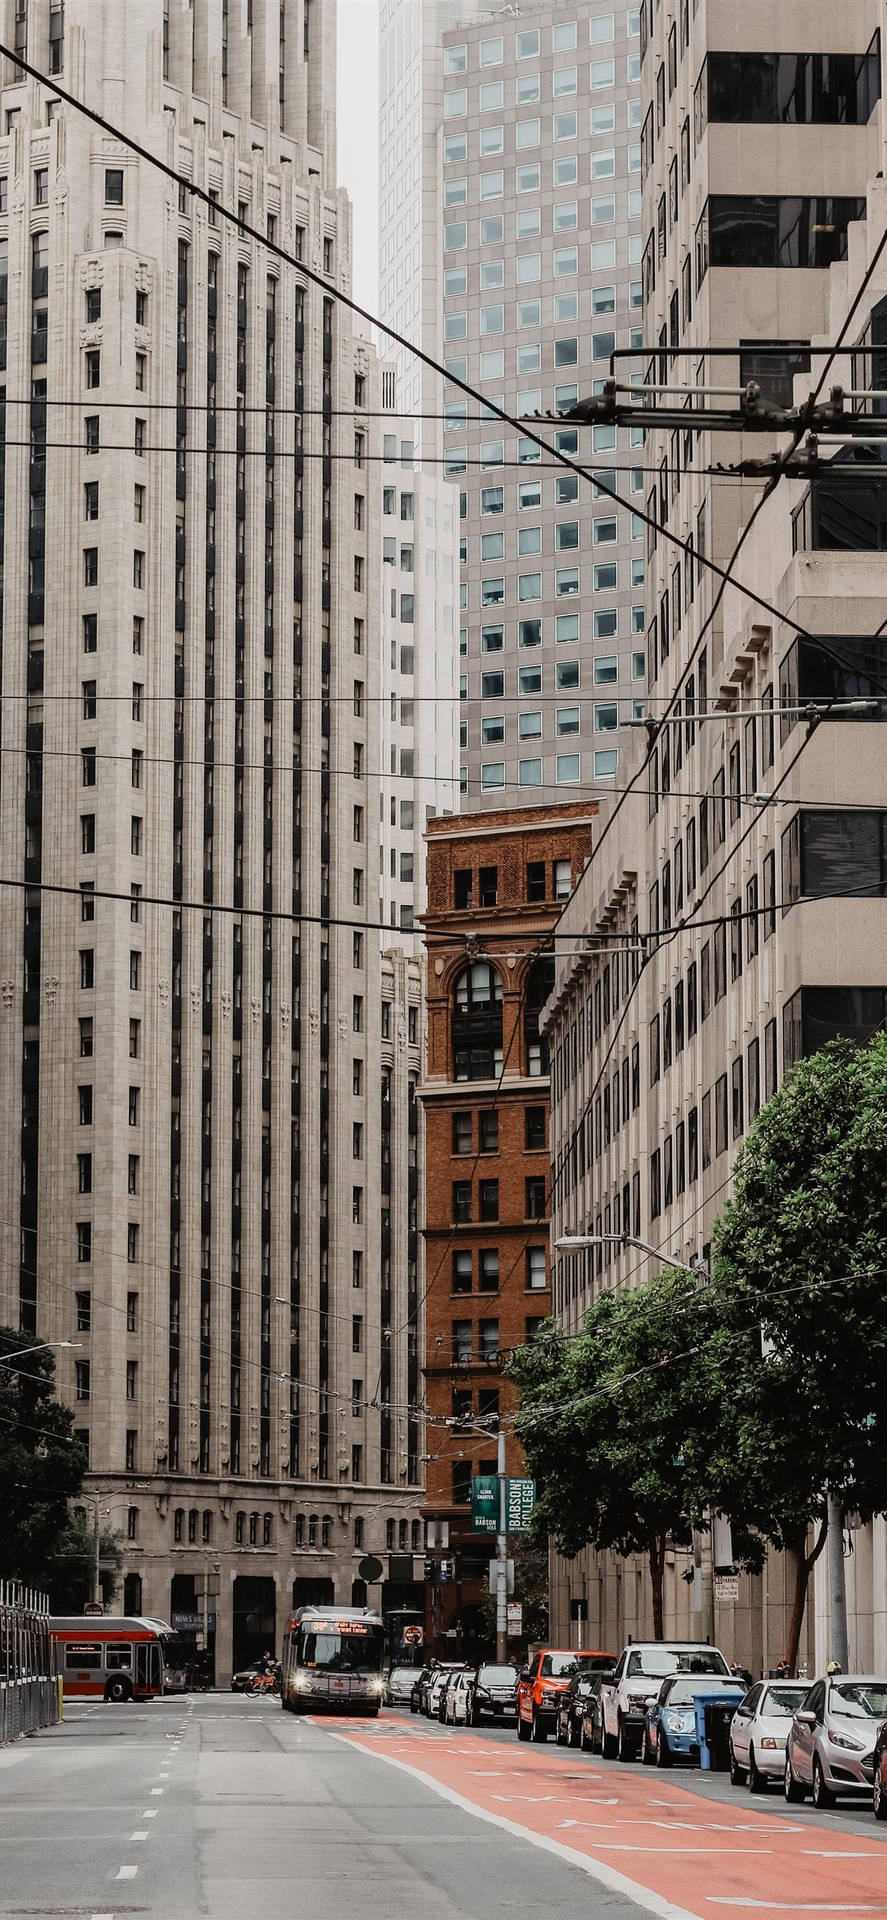 San Francisco Phone Buildings And Wires Wallpaper